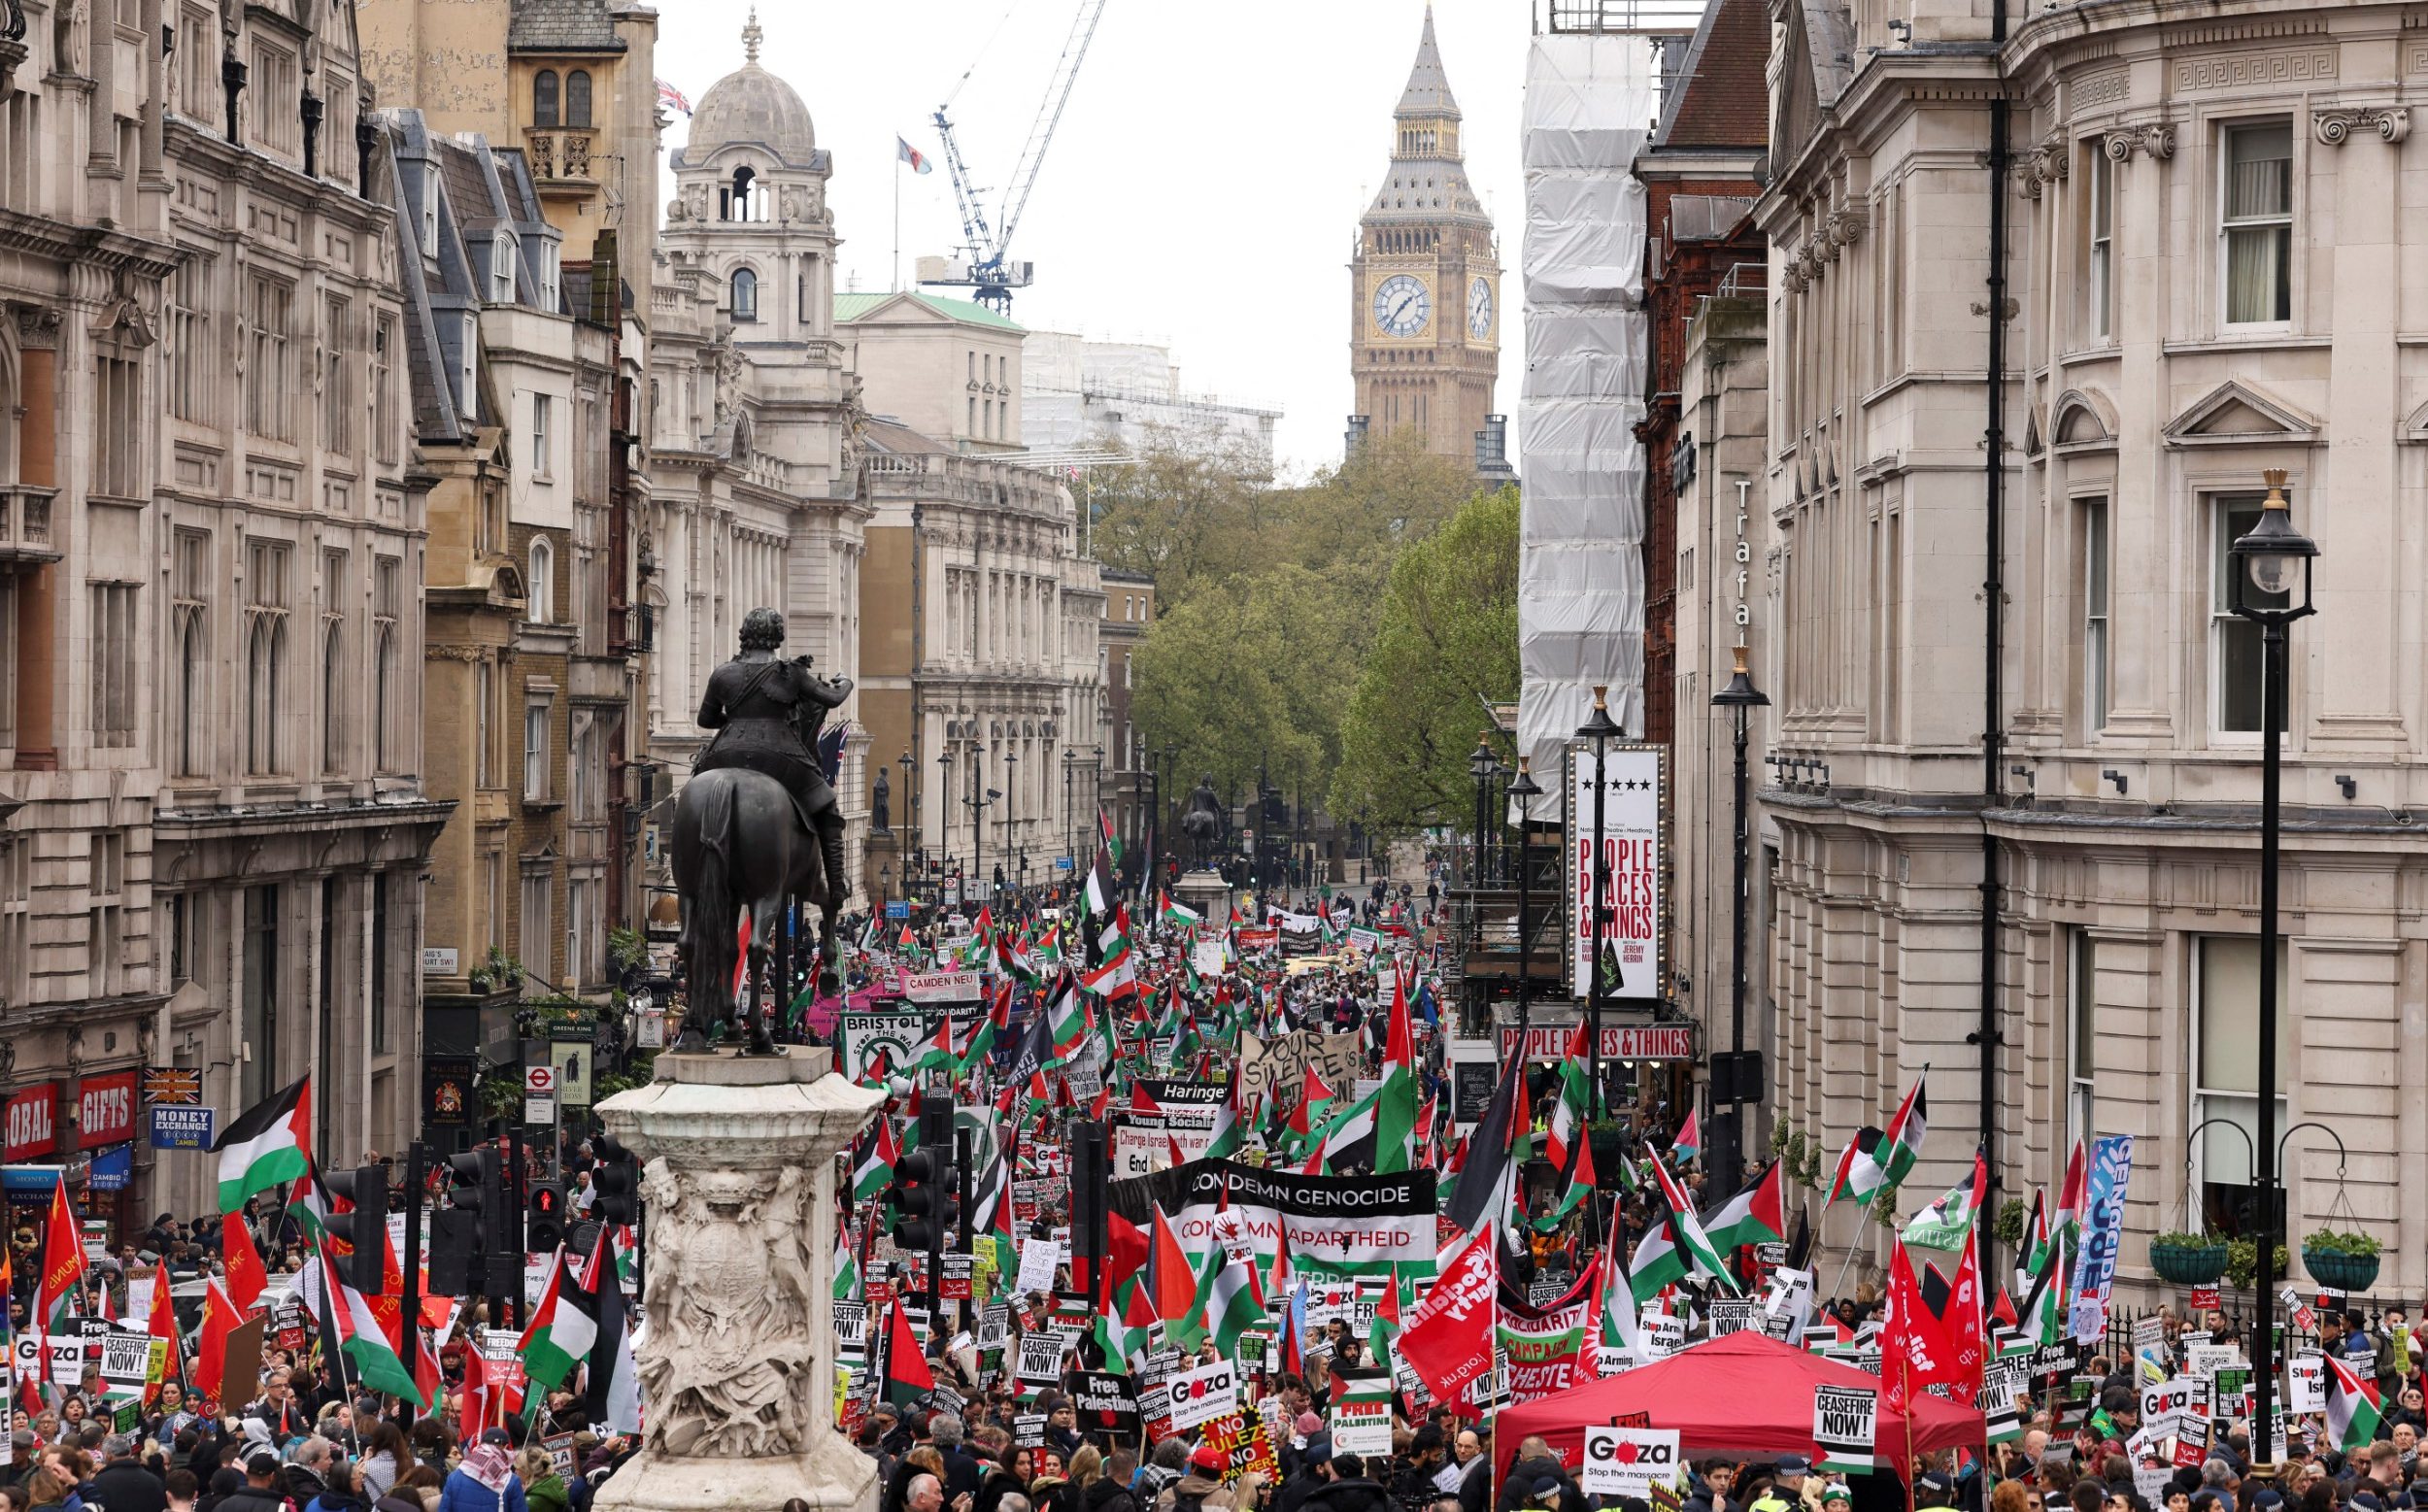 met police denies making decision to cover holocaust memorial during pro-palestinian march